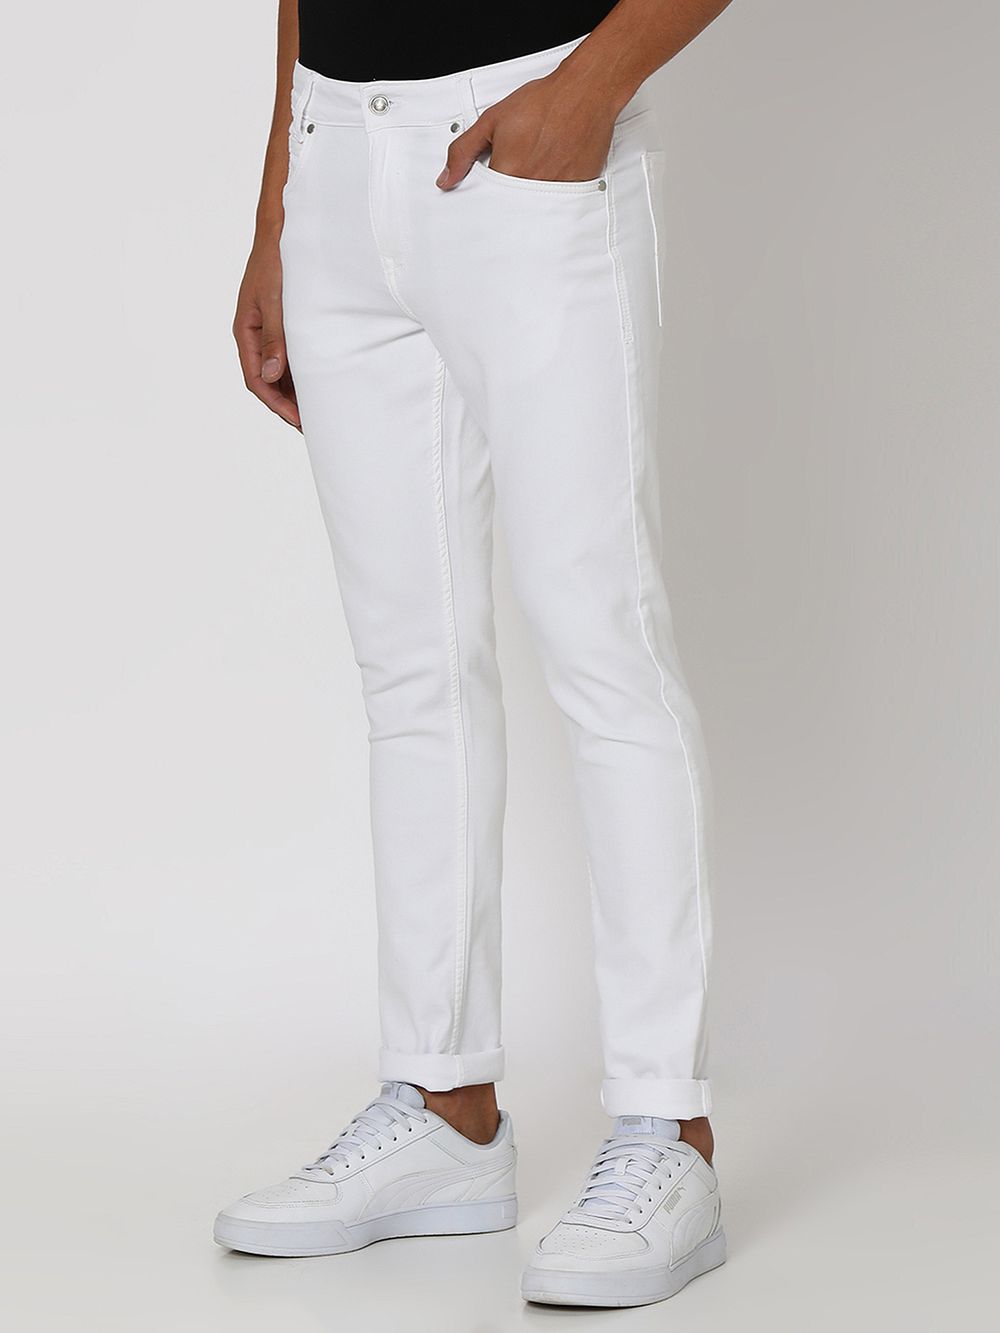 White Skinny Fit Denim Deluxe Stretch Jeans